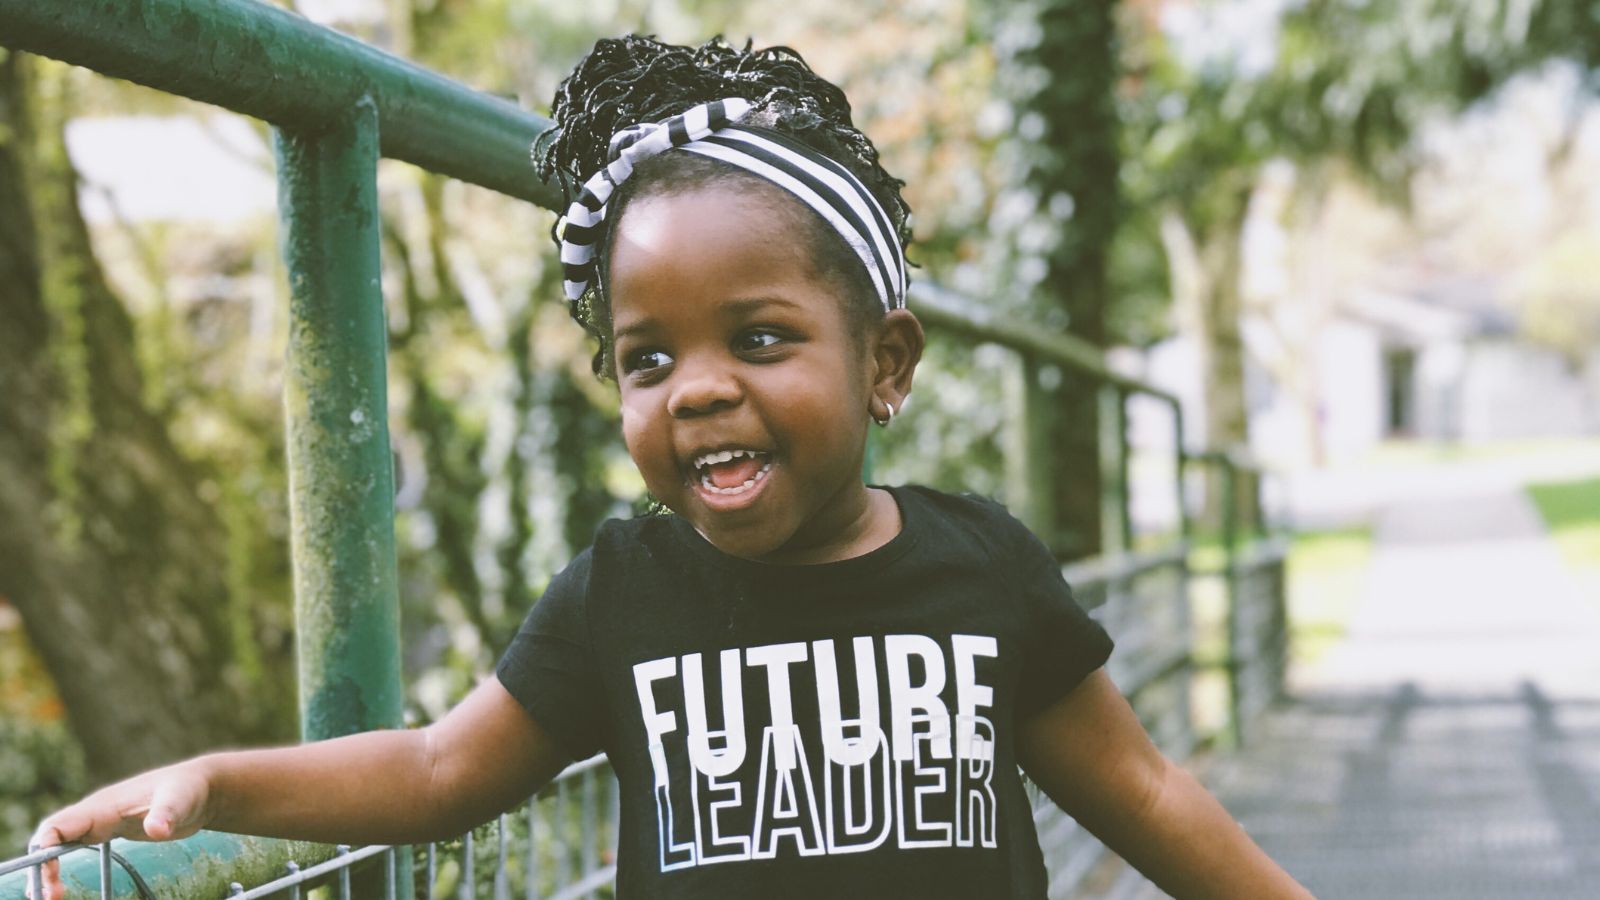 black toddler aged girl playing outside wears a dark t-shirt that reads "future leader" in light writing.